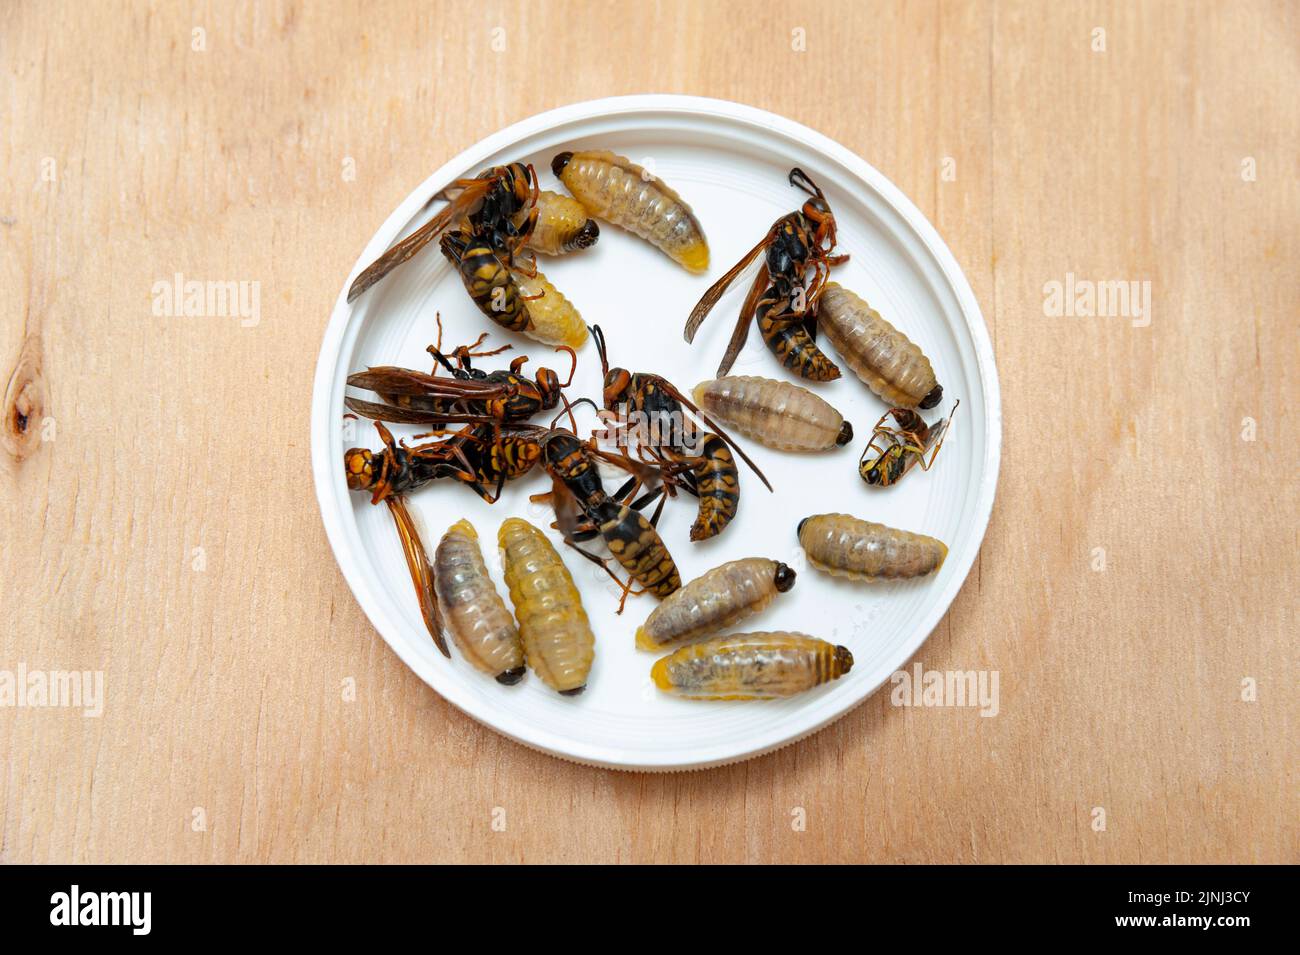 Dead larvae and wasps known as Asian Giant Hornet or Japanese Giant Hornet inside white circular container on wooden table in top view. Stock Photo